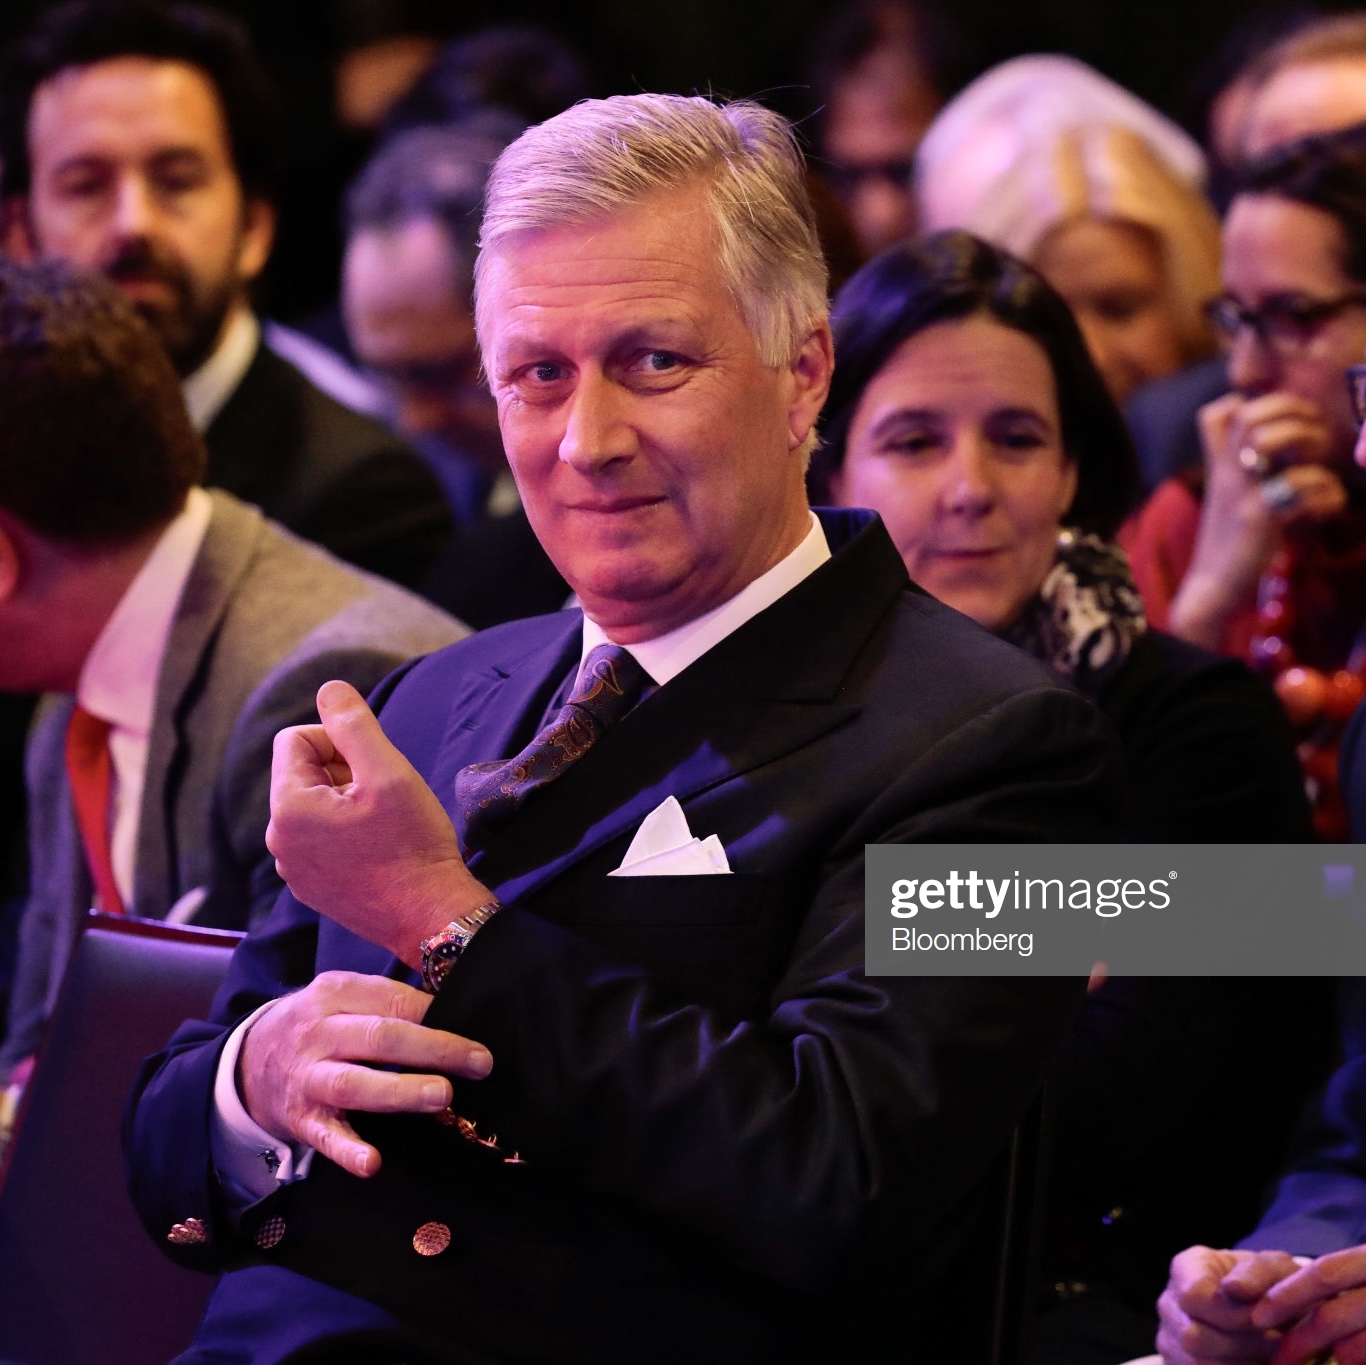 King Philippe of Belgium - Photo by Jason Alden/Bloomberg via Getty Images